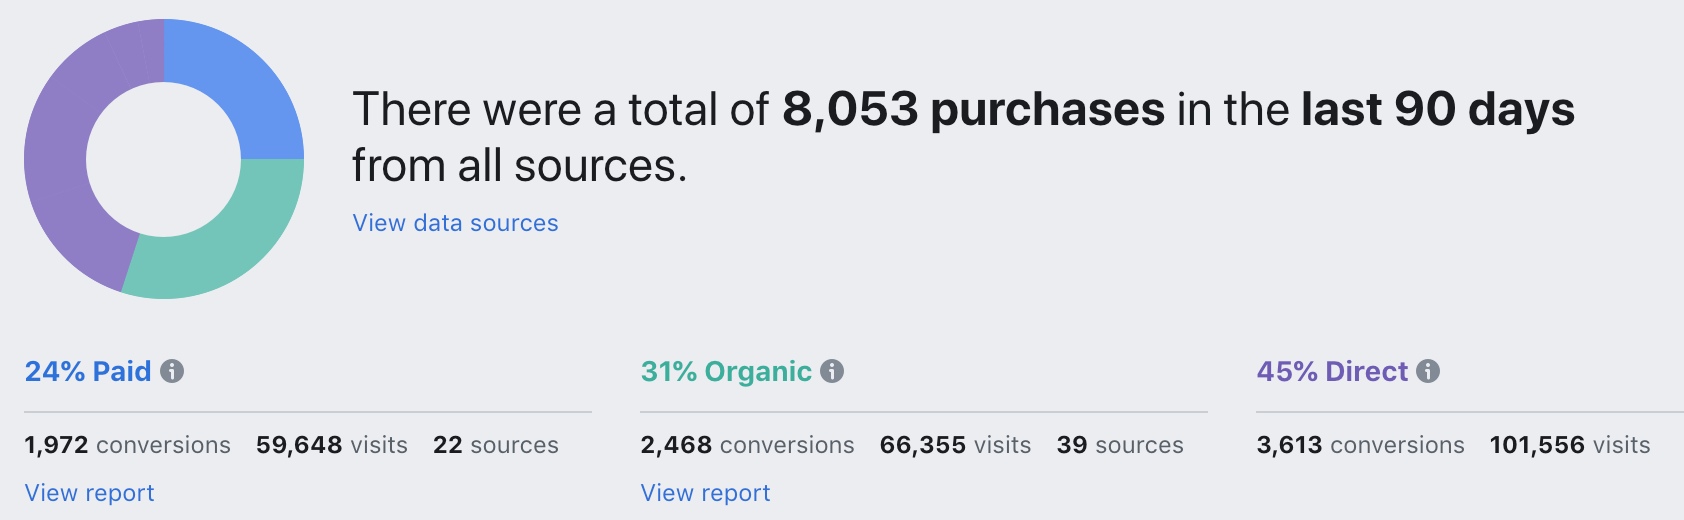 Graphic showing % of Paid, Organic, and Direct